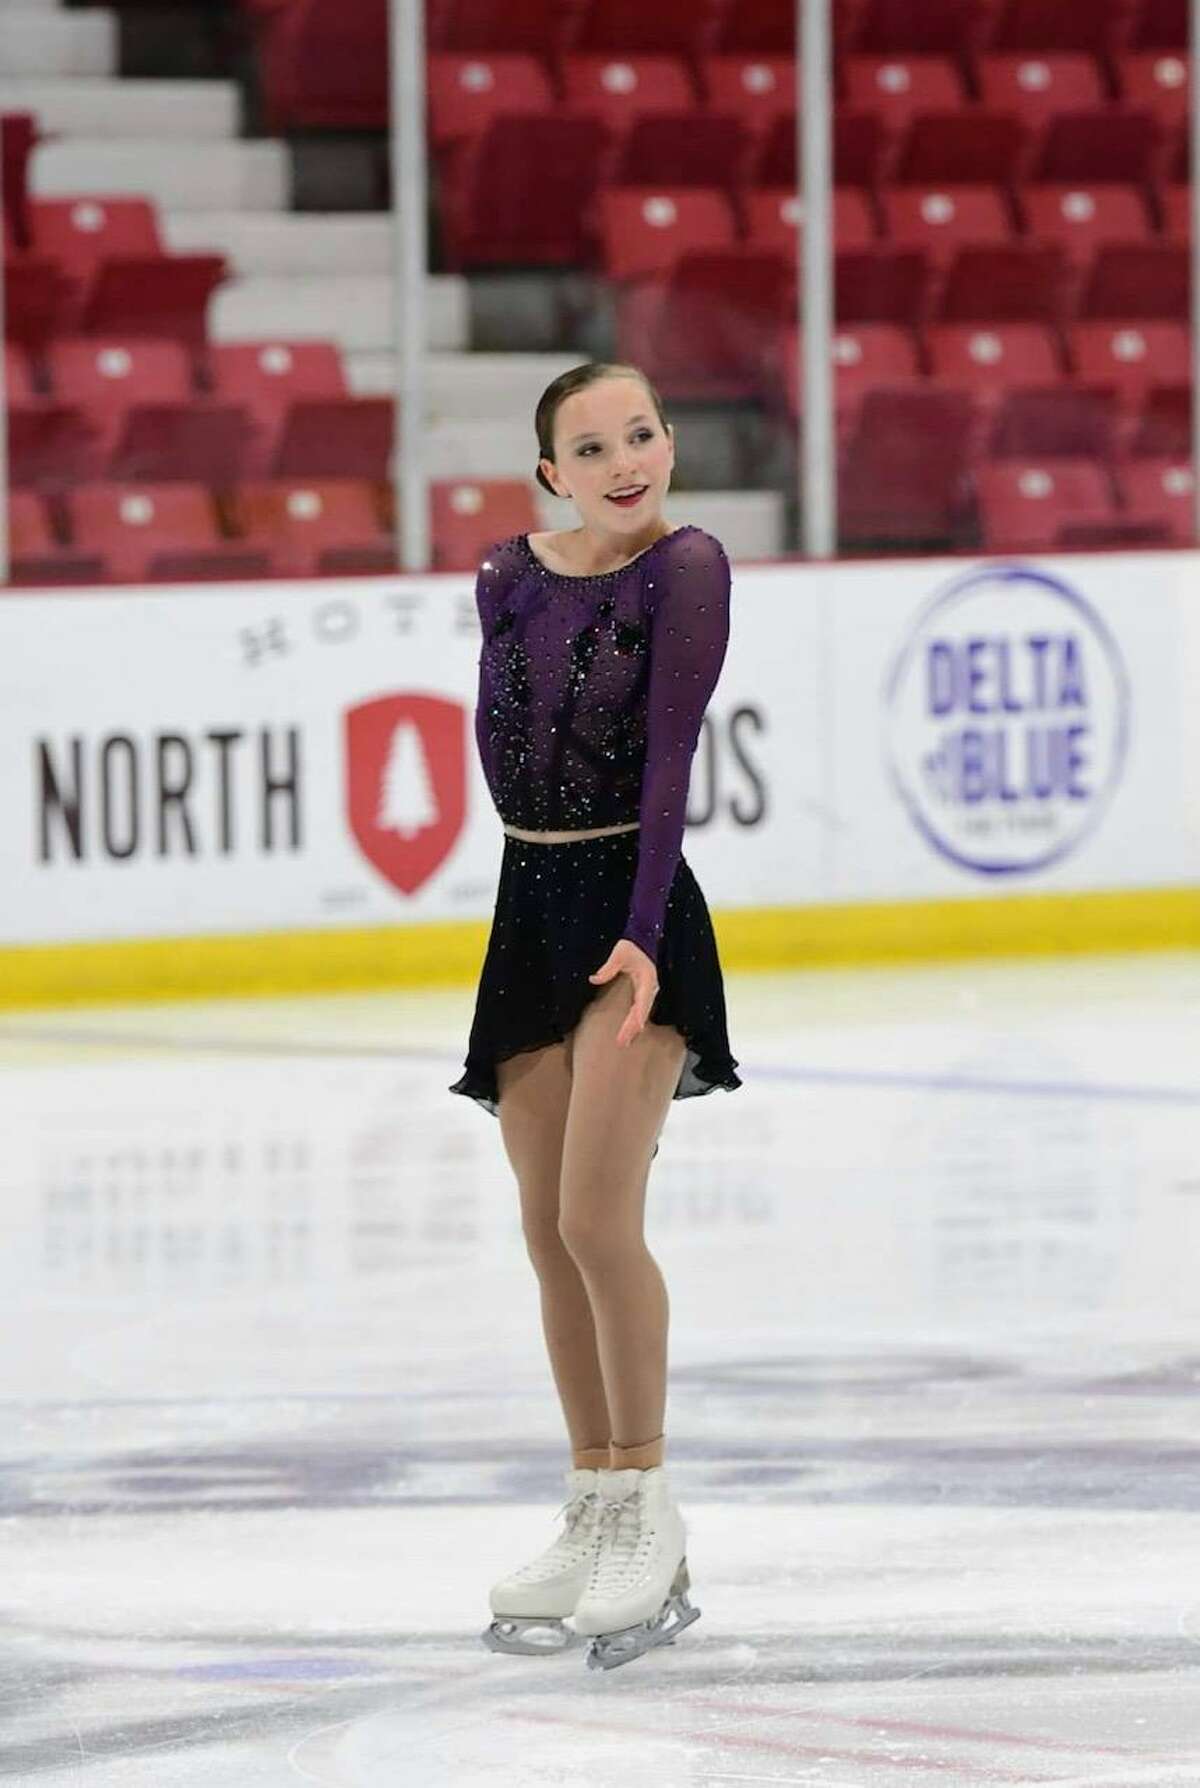 Emilia Murdock, 16 years old of Darien, will be representing the United States at The 2019 International Skating Union Junior Grand Prix of Figure Skating.